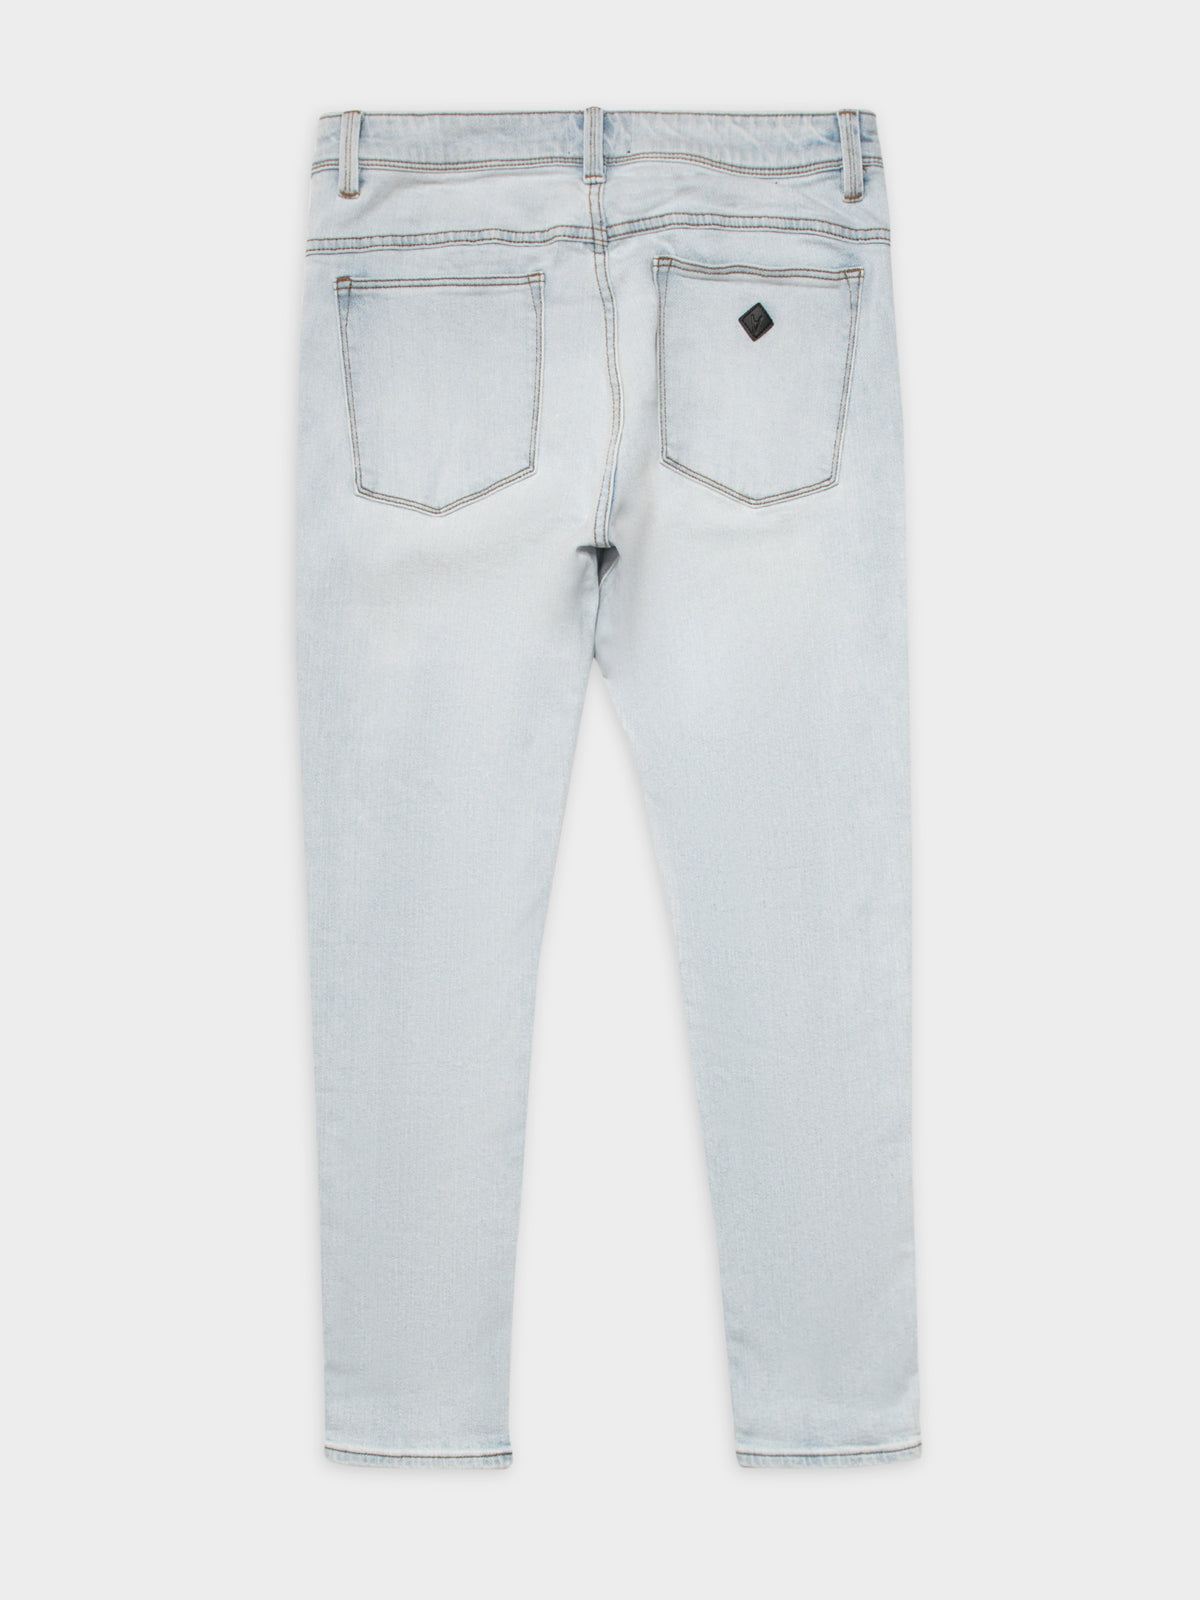 A Dropped Skinny Jeans in Light Blue